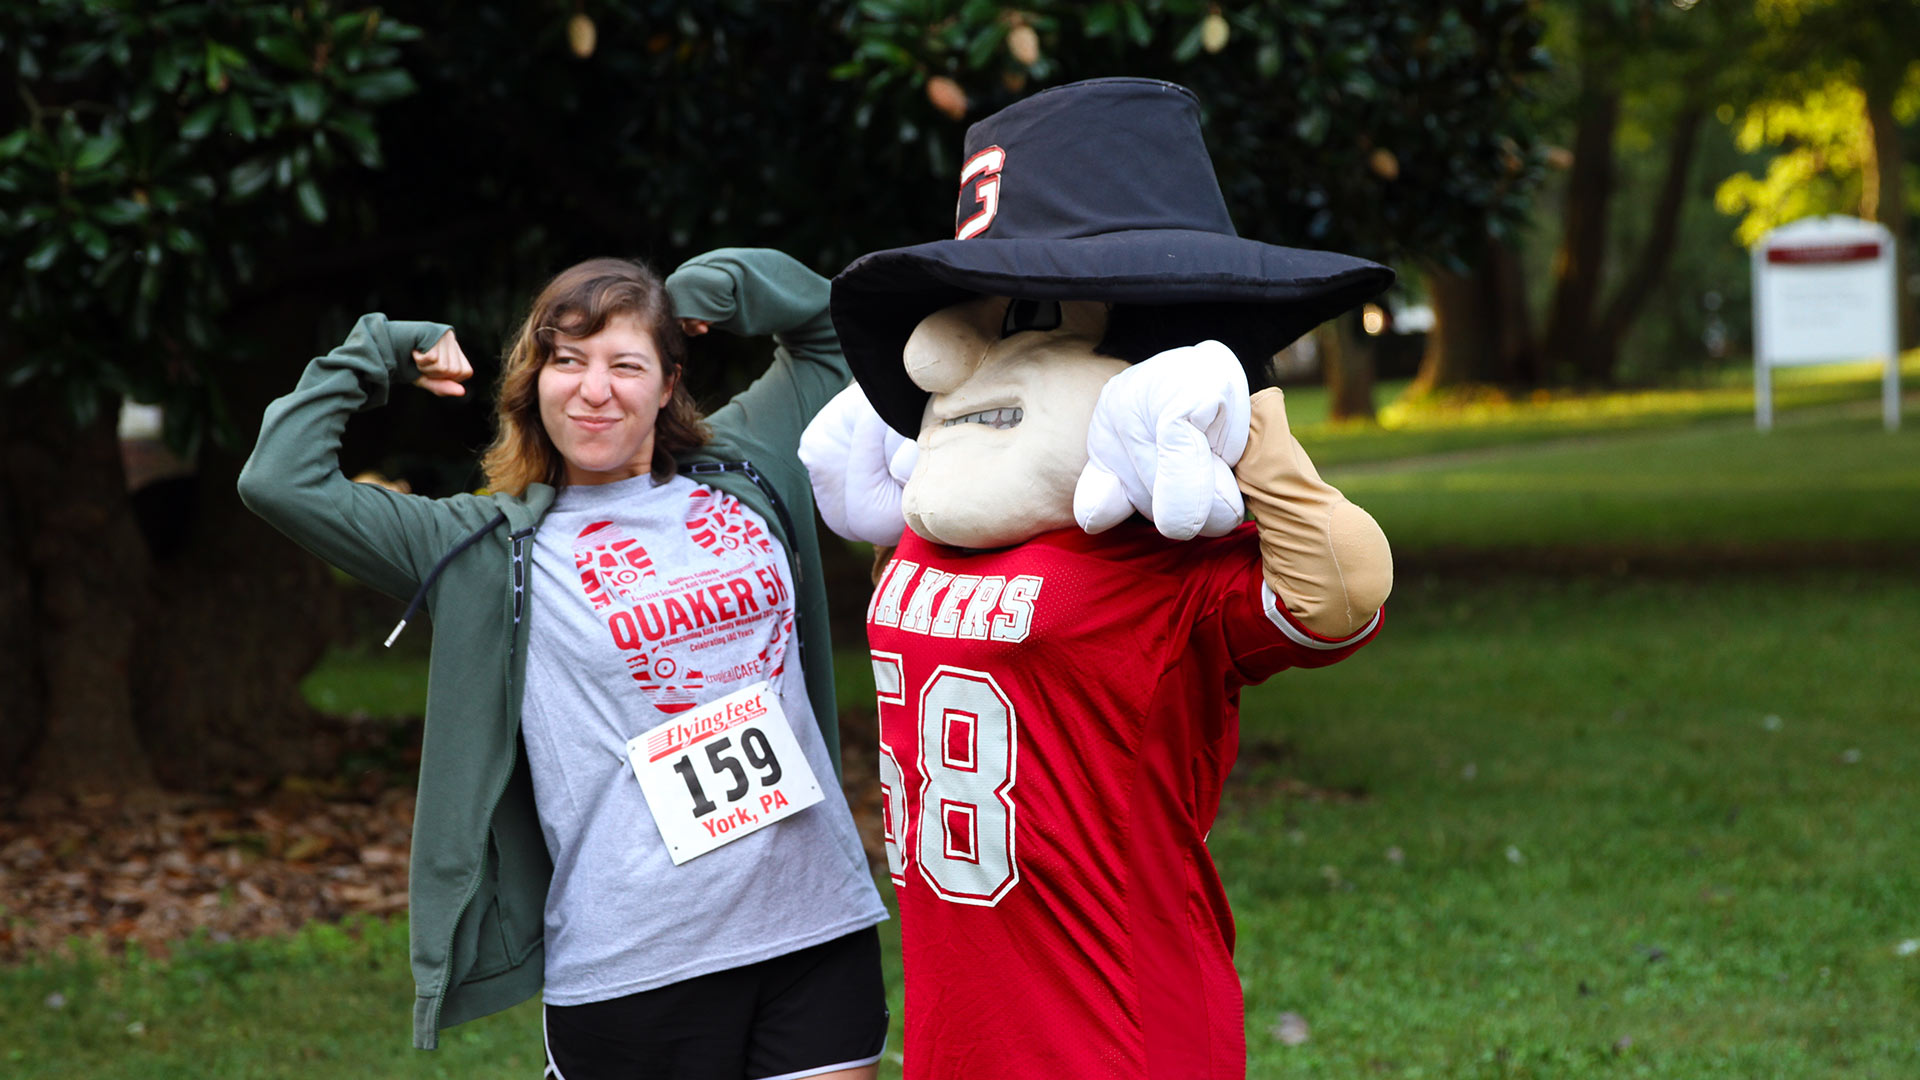 Nathan the Quaker Man mascot and a student show off their muscles at Homecoming.